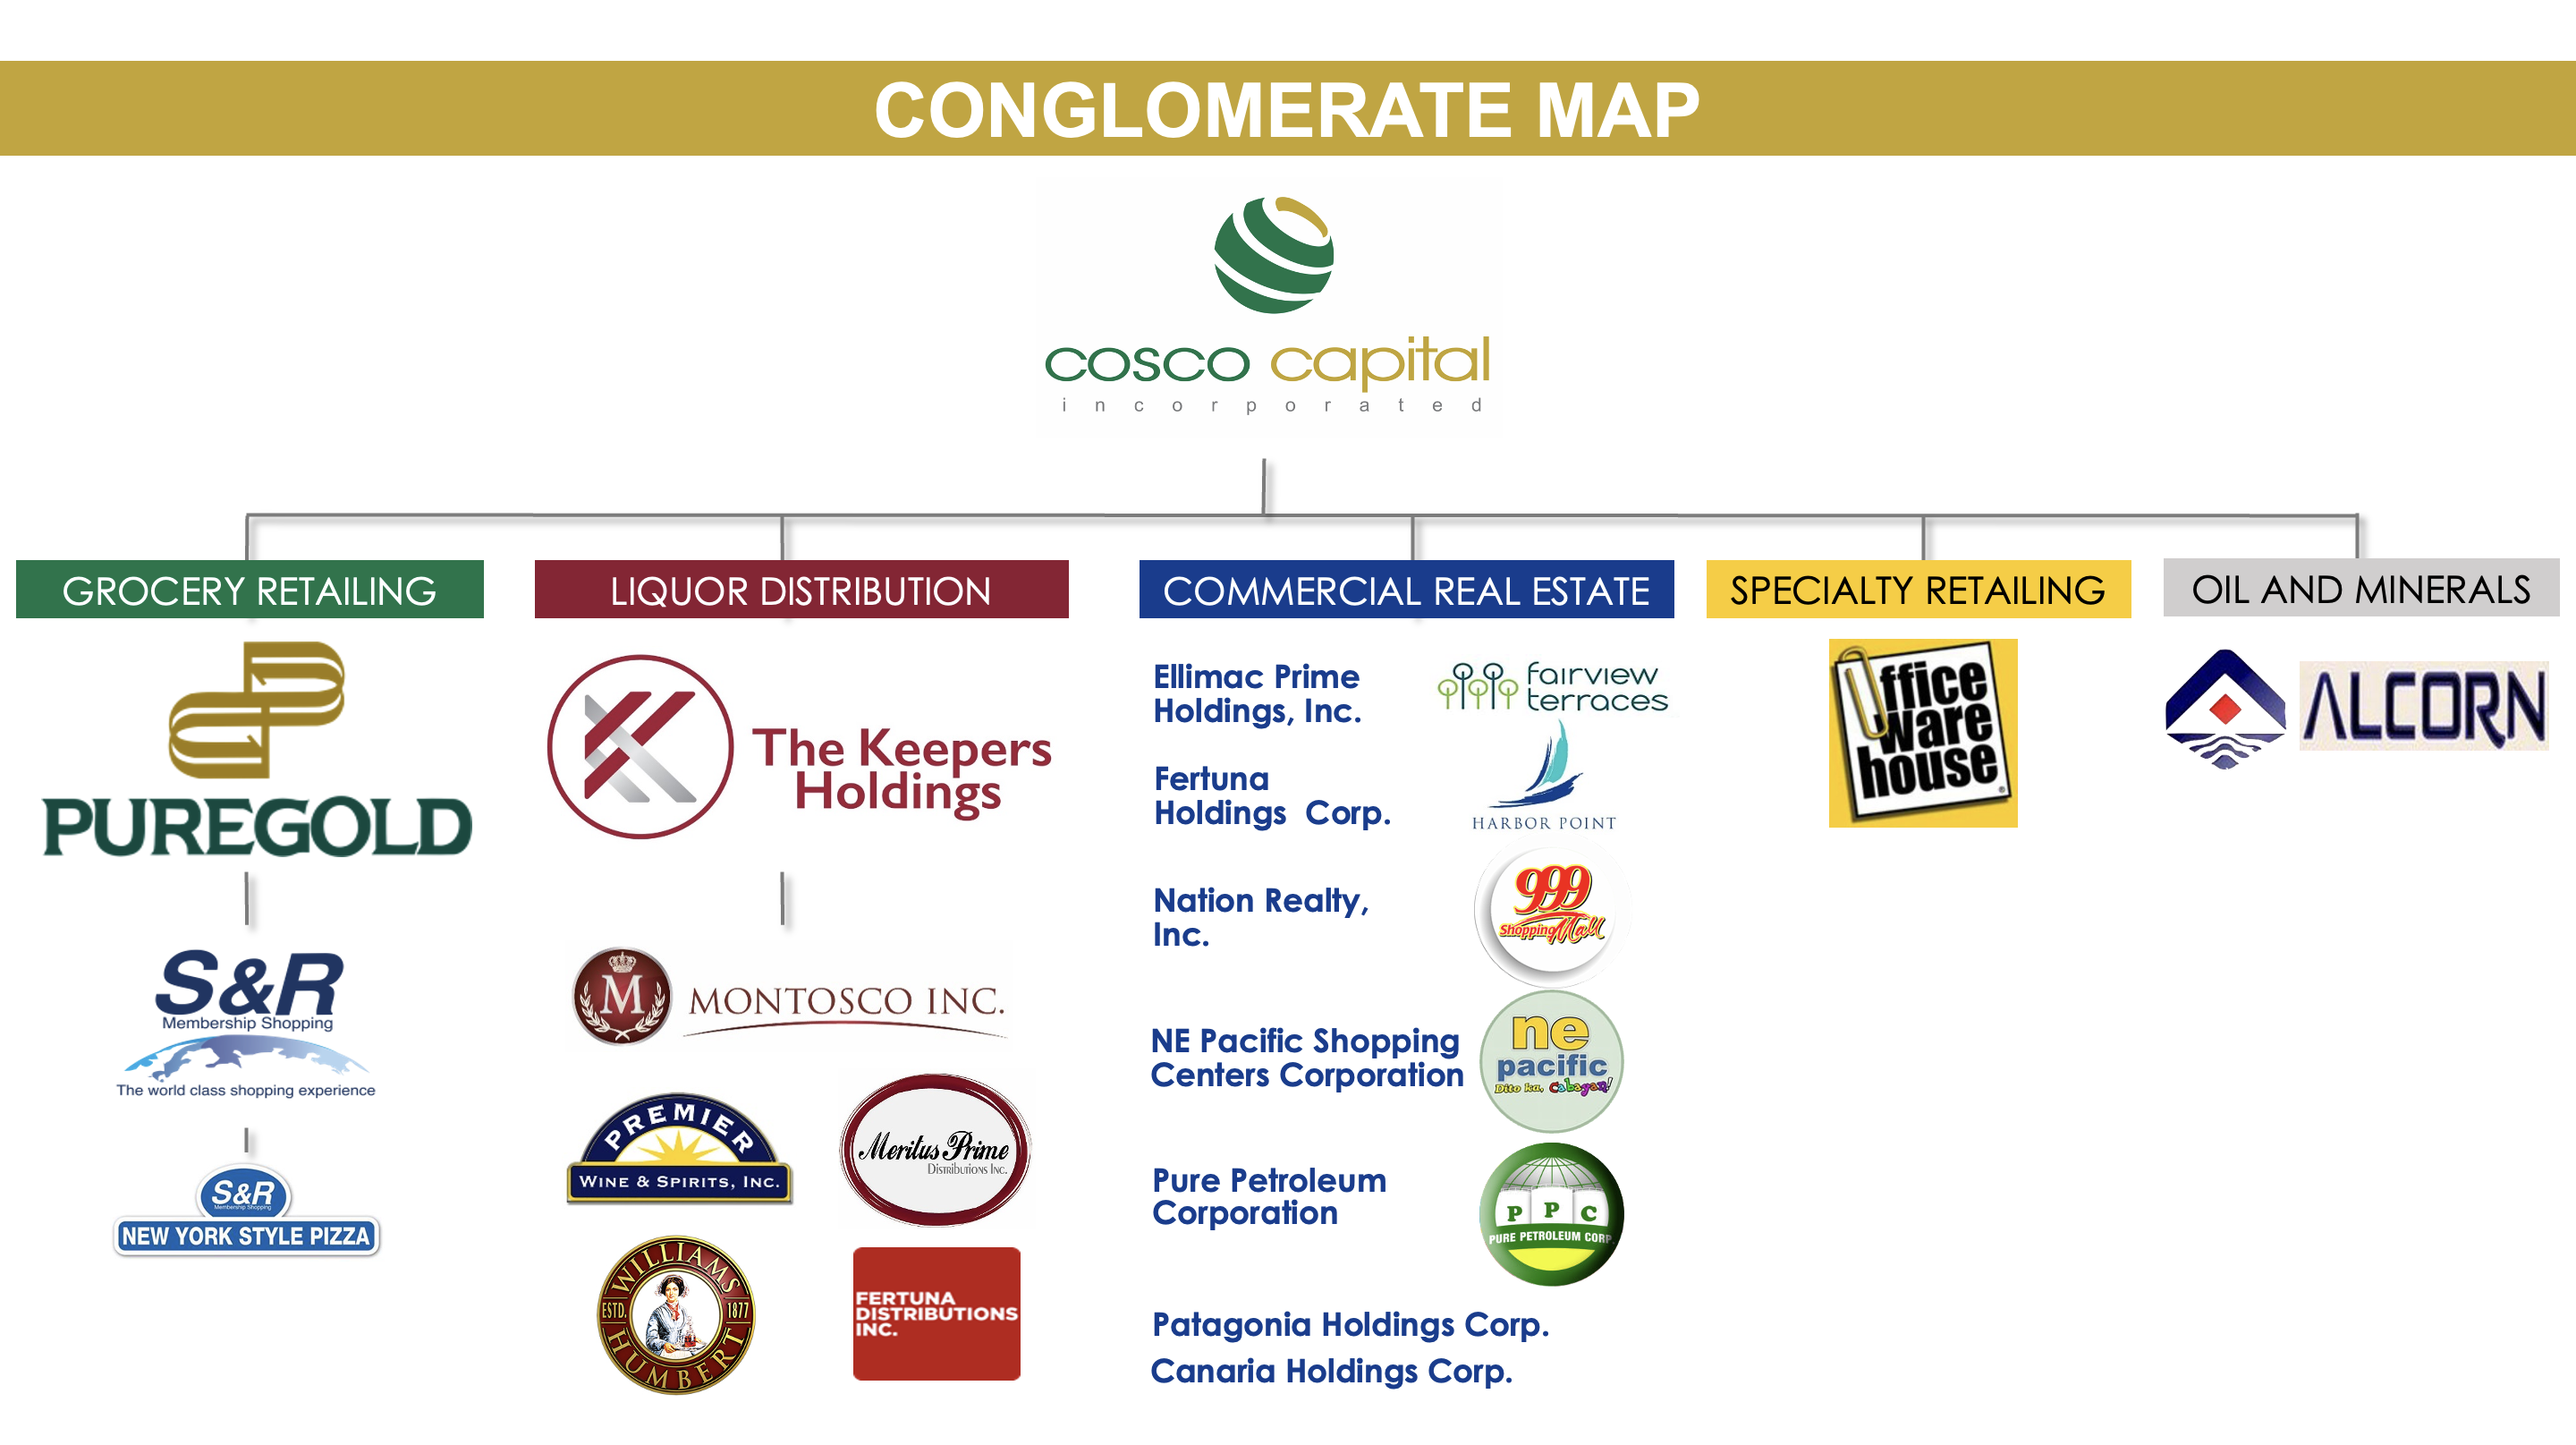 Conglomerate Map